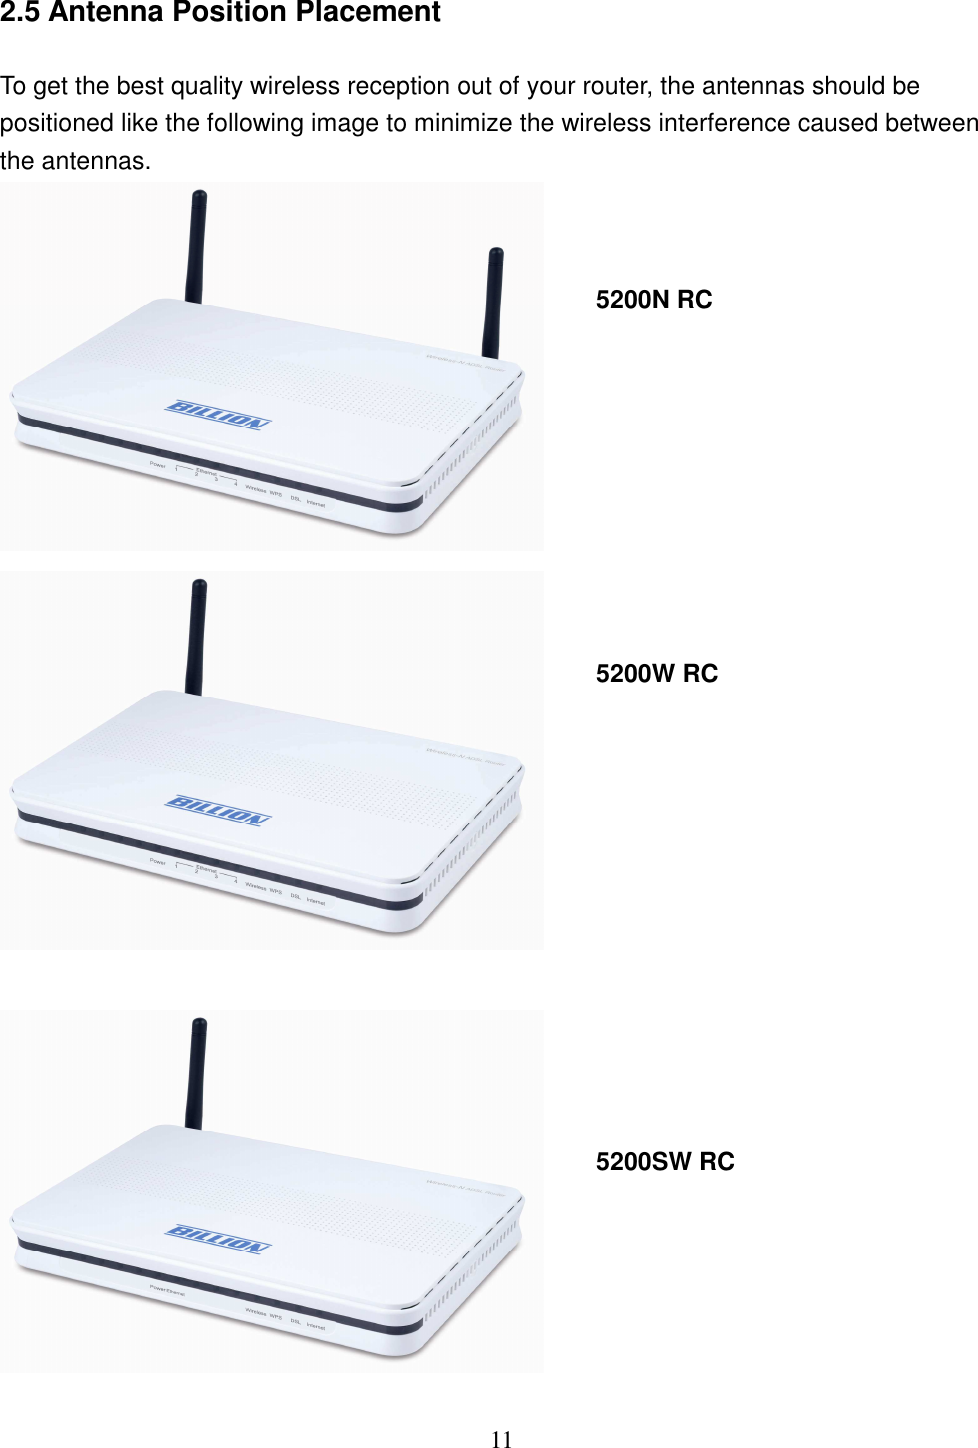 11 2.5 Antenna Position Placement To get the best quality wireless reception out of your router, the antennas should be positioned like the following image to minimize the wireless interference caused between the antennas.     5200N RC 5200W RC 5200SW RC 